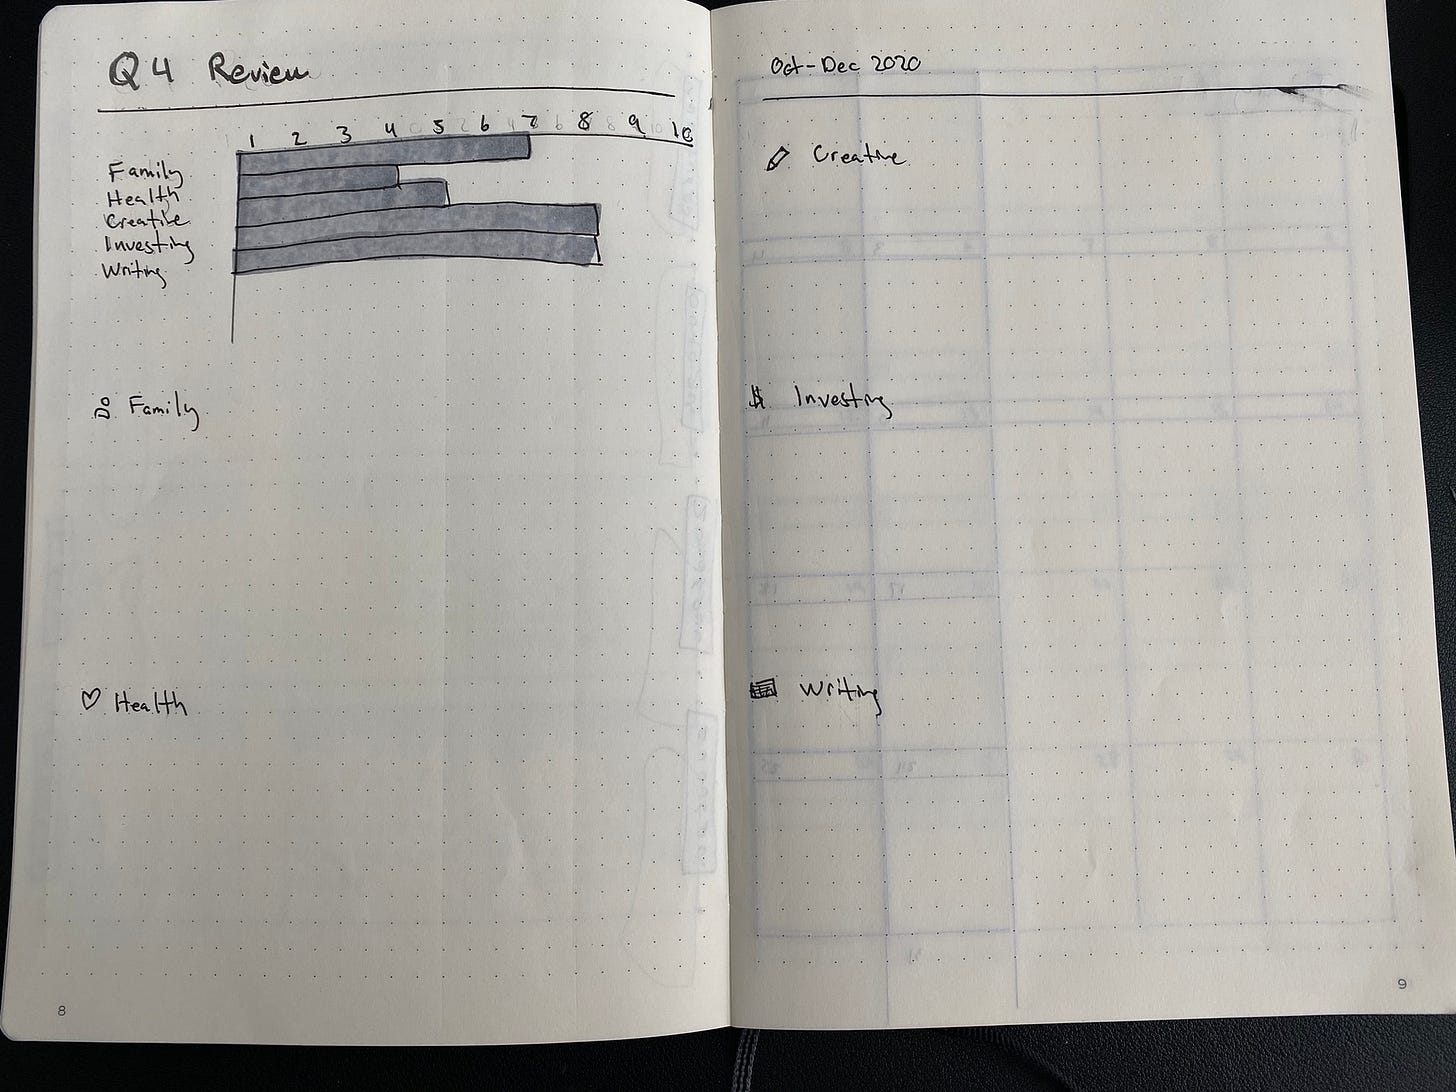 Pages that show a reflection on a quarterly review.